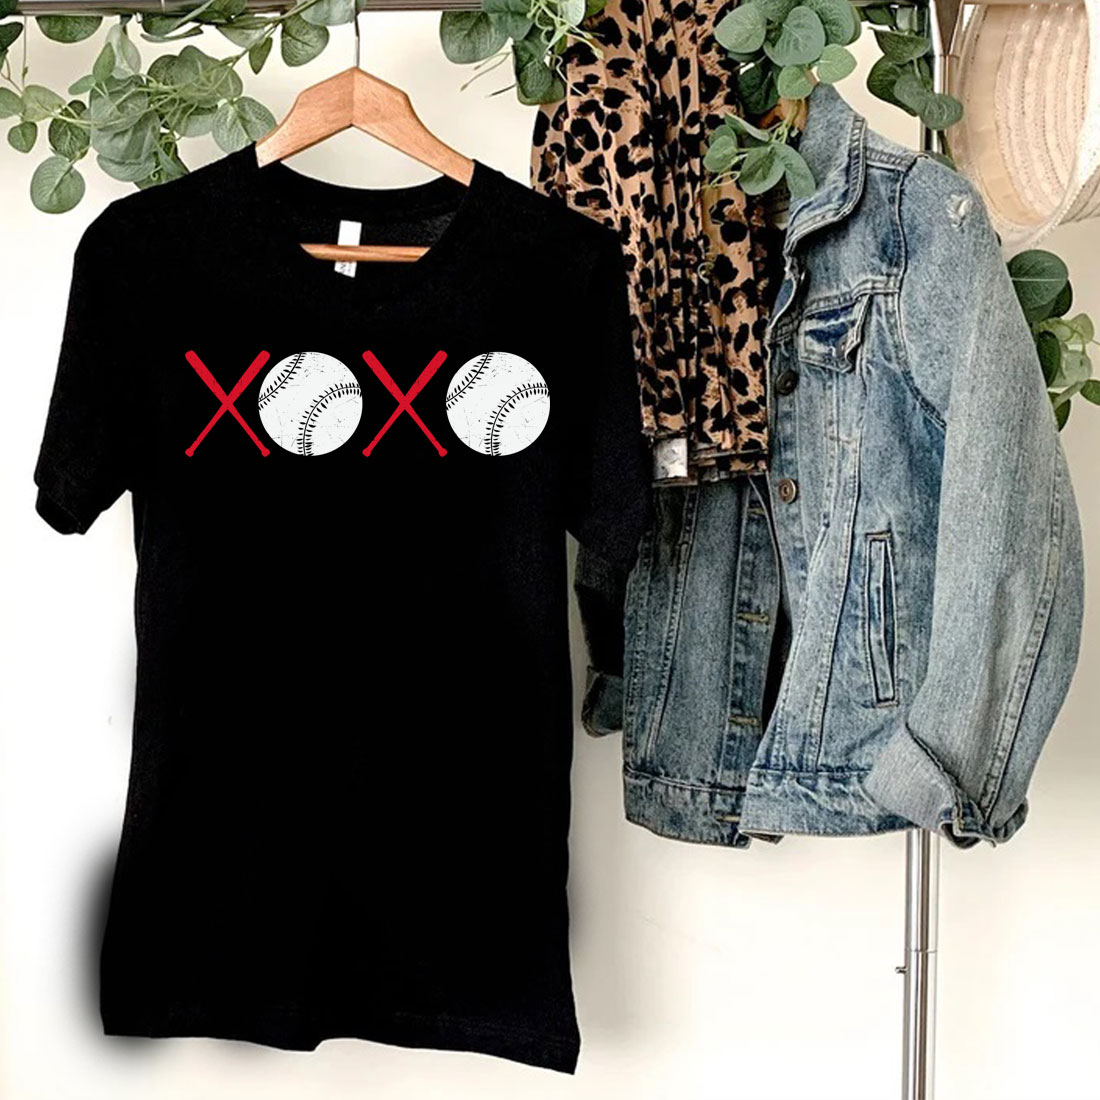 T - shirt with two baseballs and crossed bats on it.